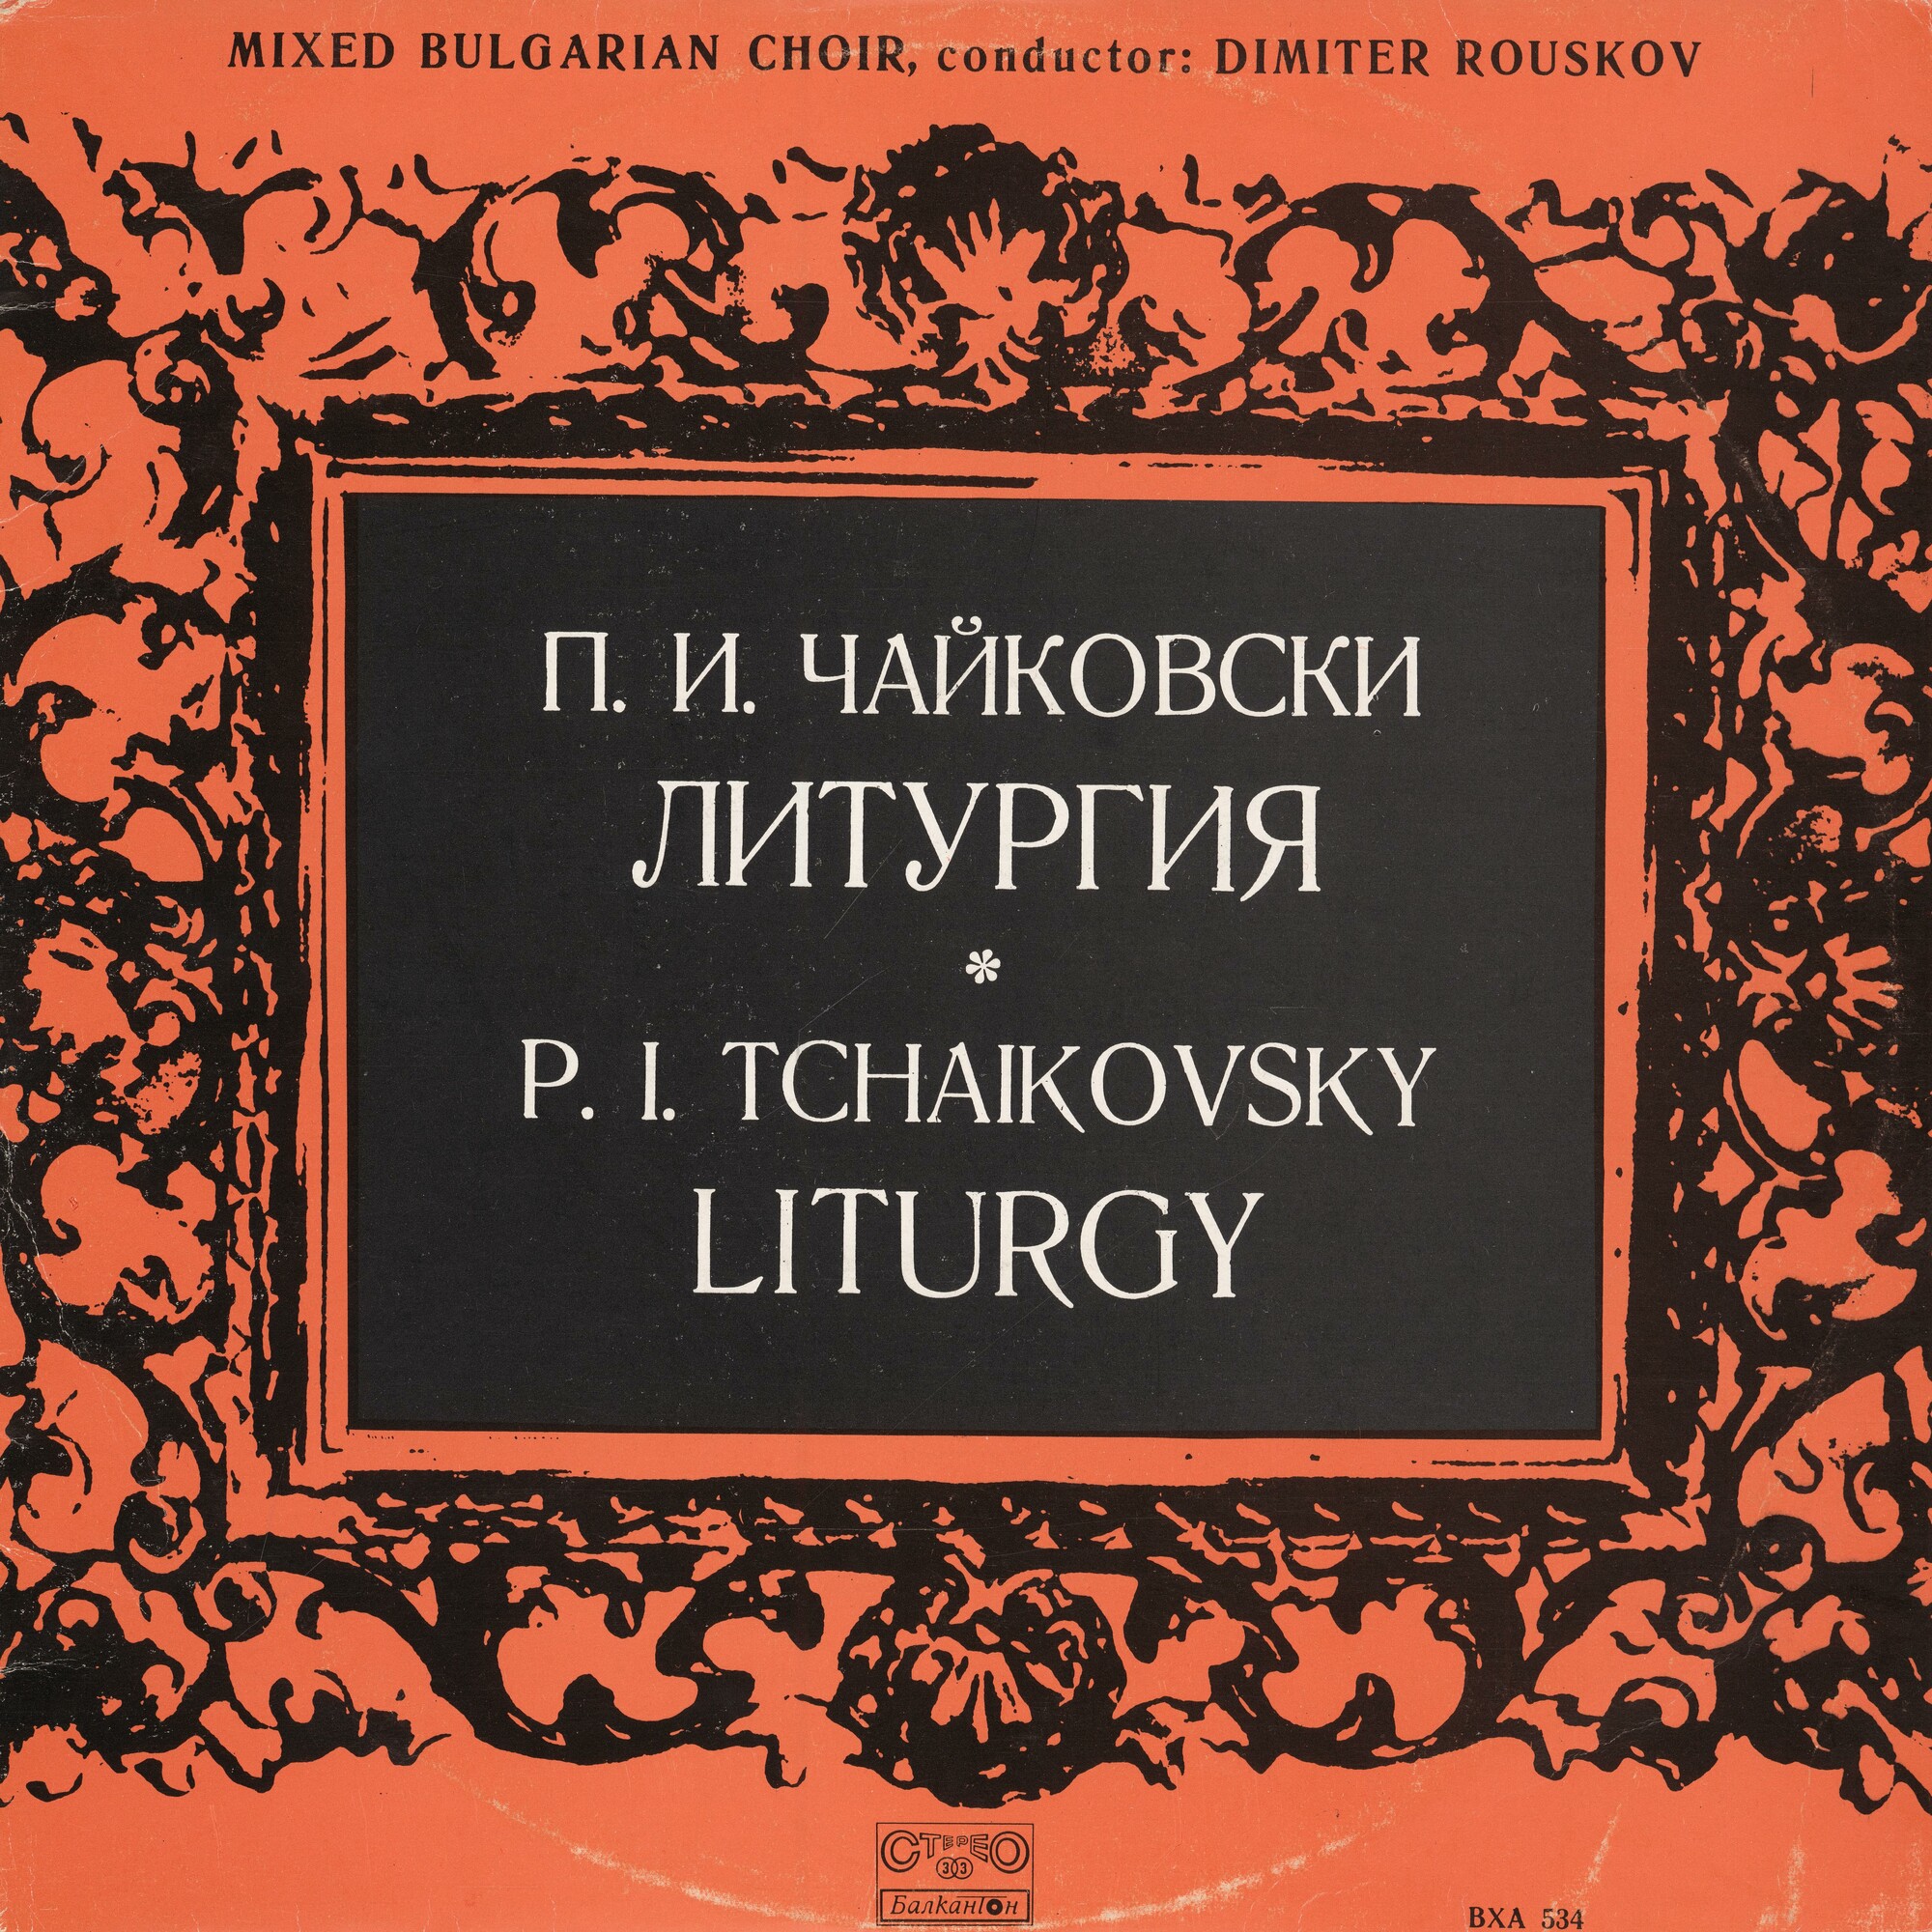 P. I. Tchaikovsky. Lithurgy. Sung By A Mixed Bulgarian Choir. Conductor: Dimiter Rouskov